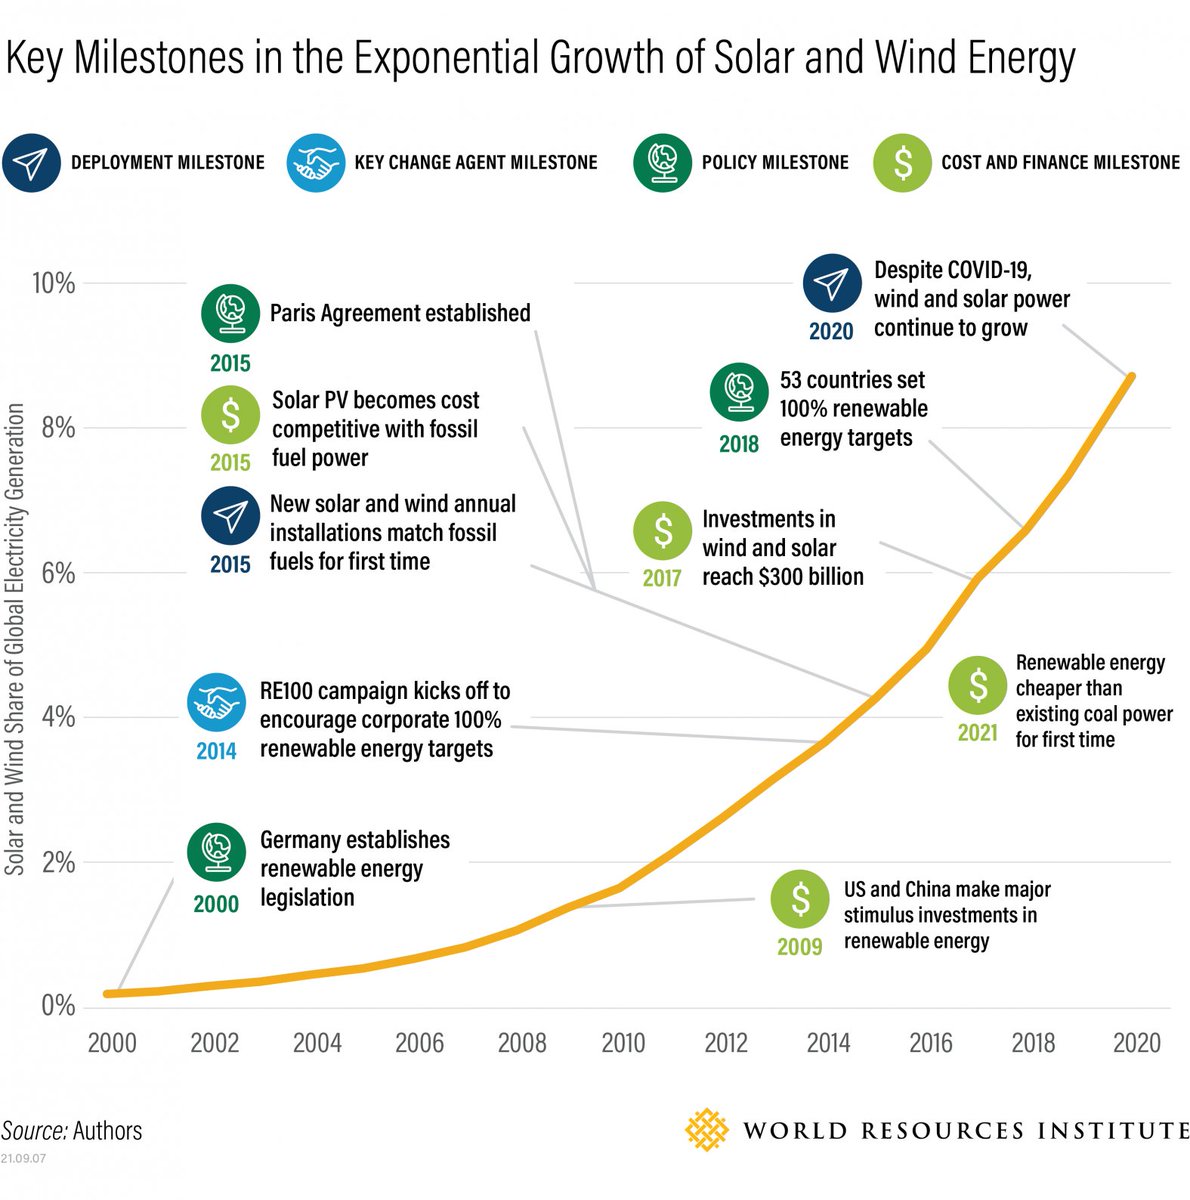 The market share of solar and wind in global electricity generation grew at a compound average annual growth rate of 15% from 2015-2020. If exponential growth continued at this rate, solar and wind would reach 45% of electricity generation by 2030 and 100% by 2033.